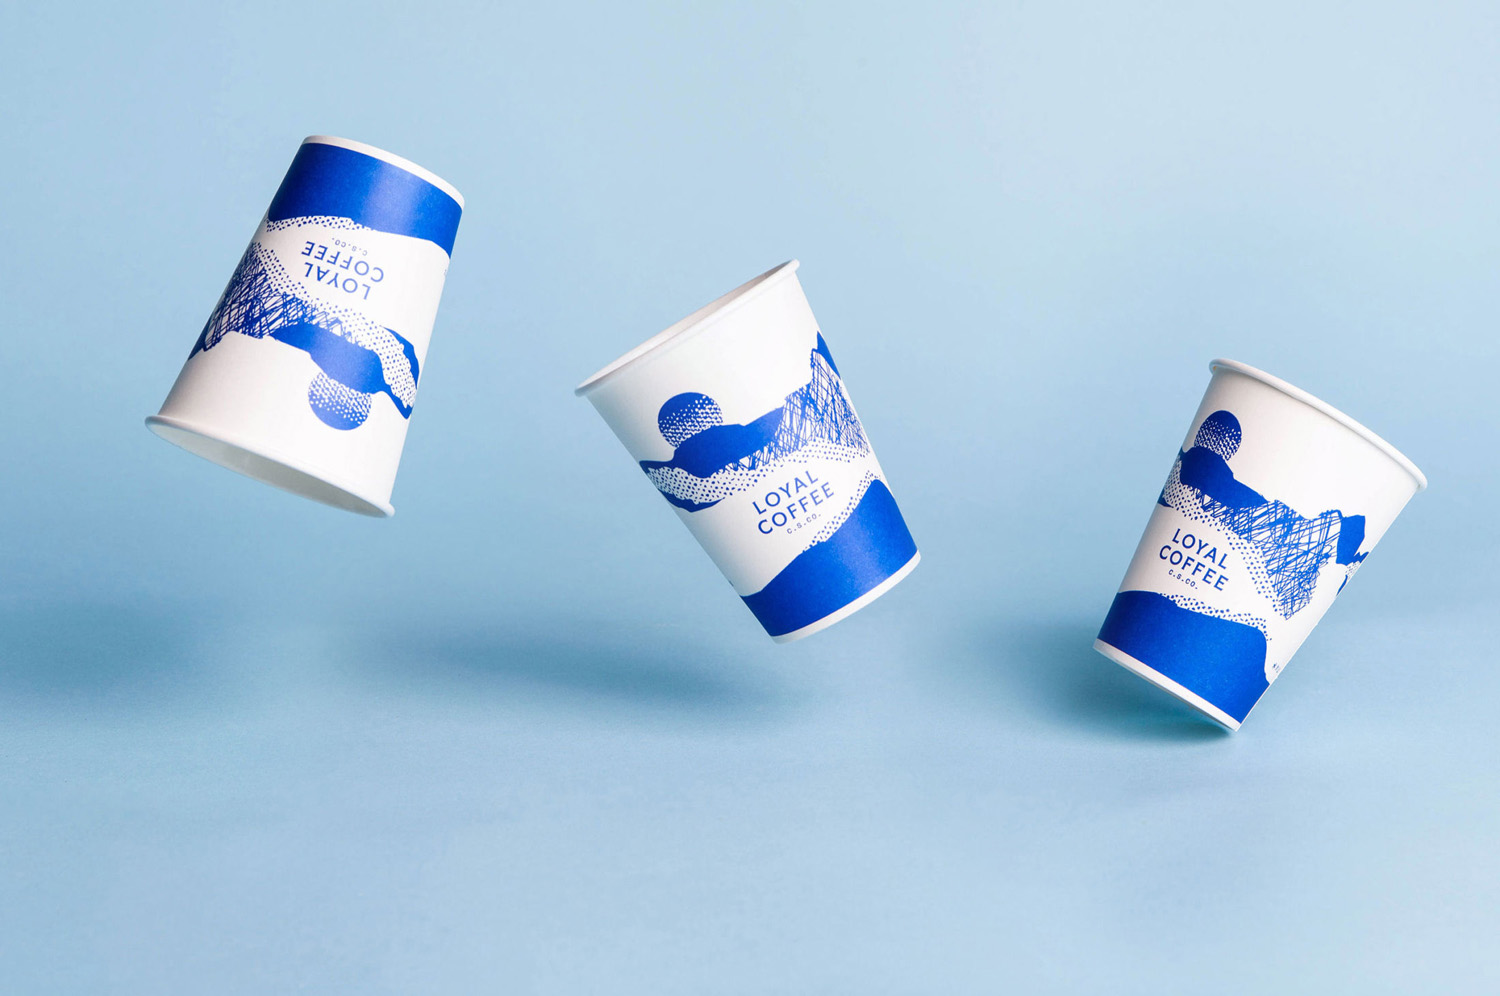 Illustrated coffee cups and visual identity design by Mast for barista-run and Colorado-based Loyal Coffee